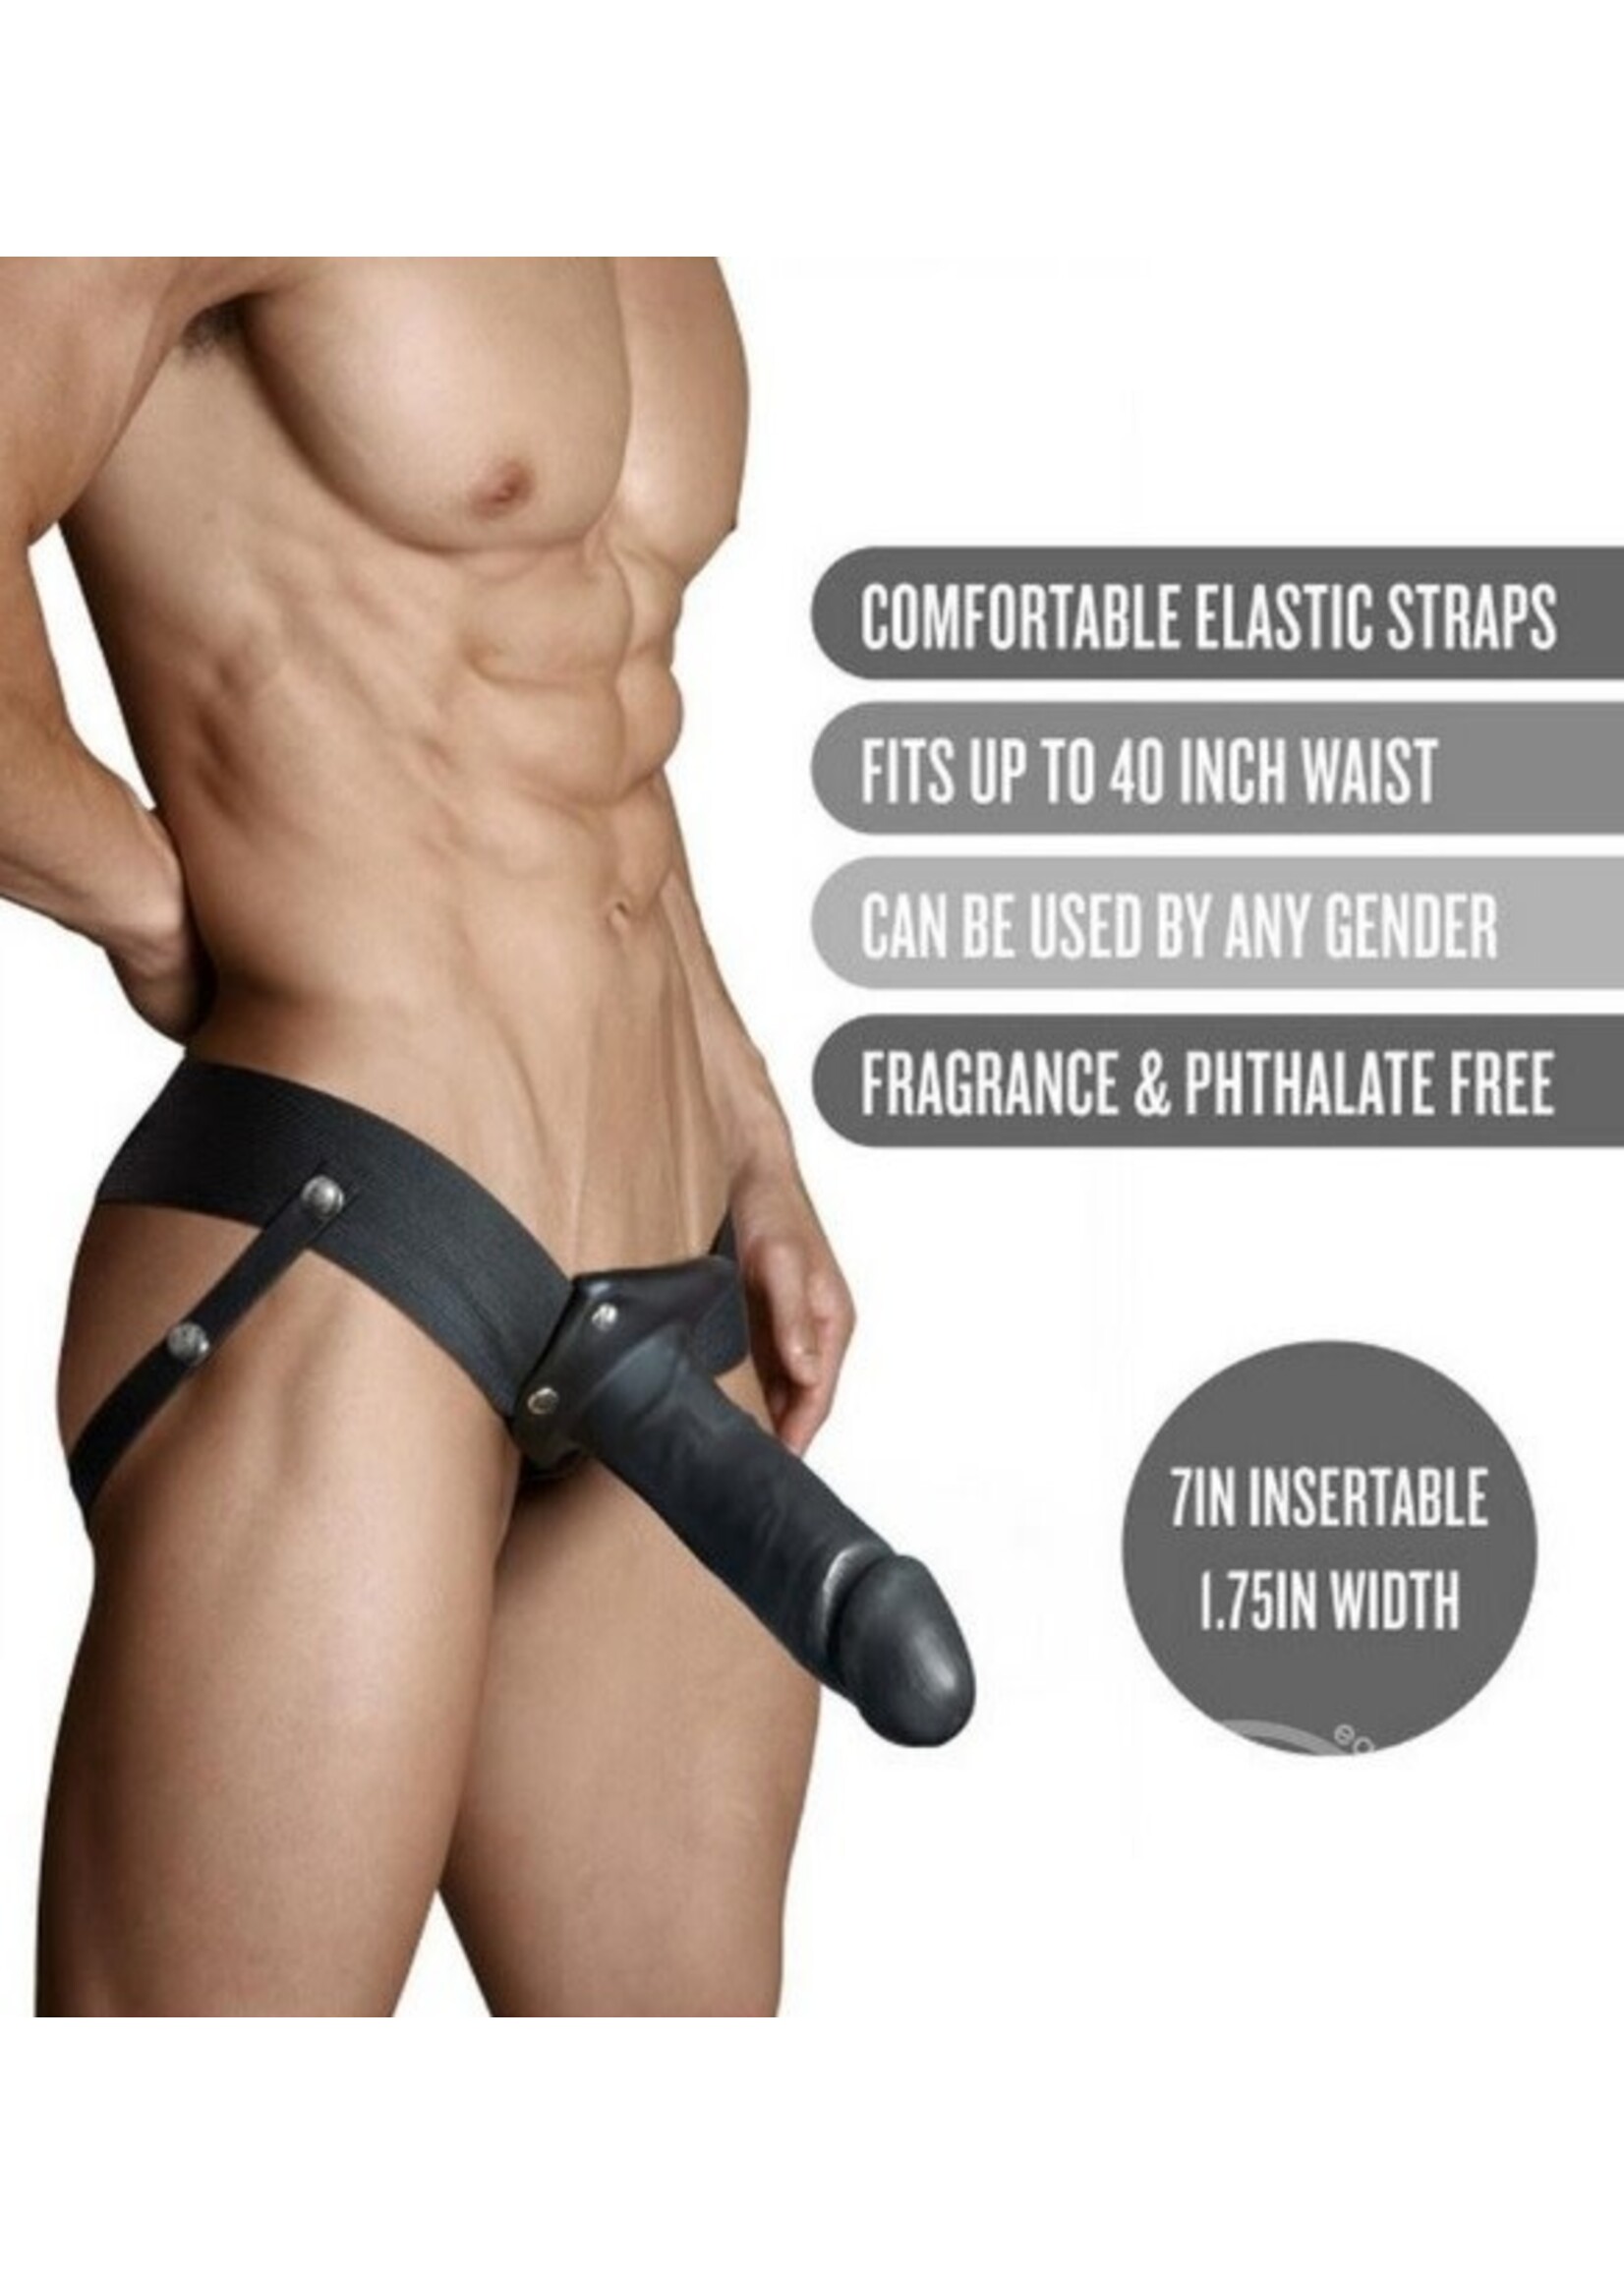 Dr. Skin Hollow Strap-On with Dildo 7in - Black